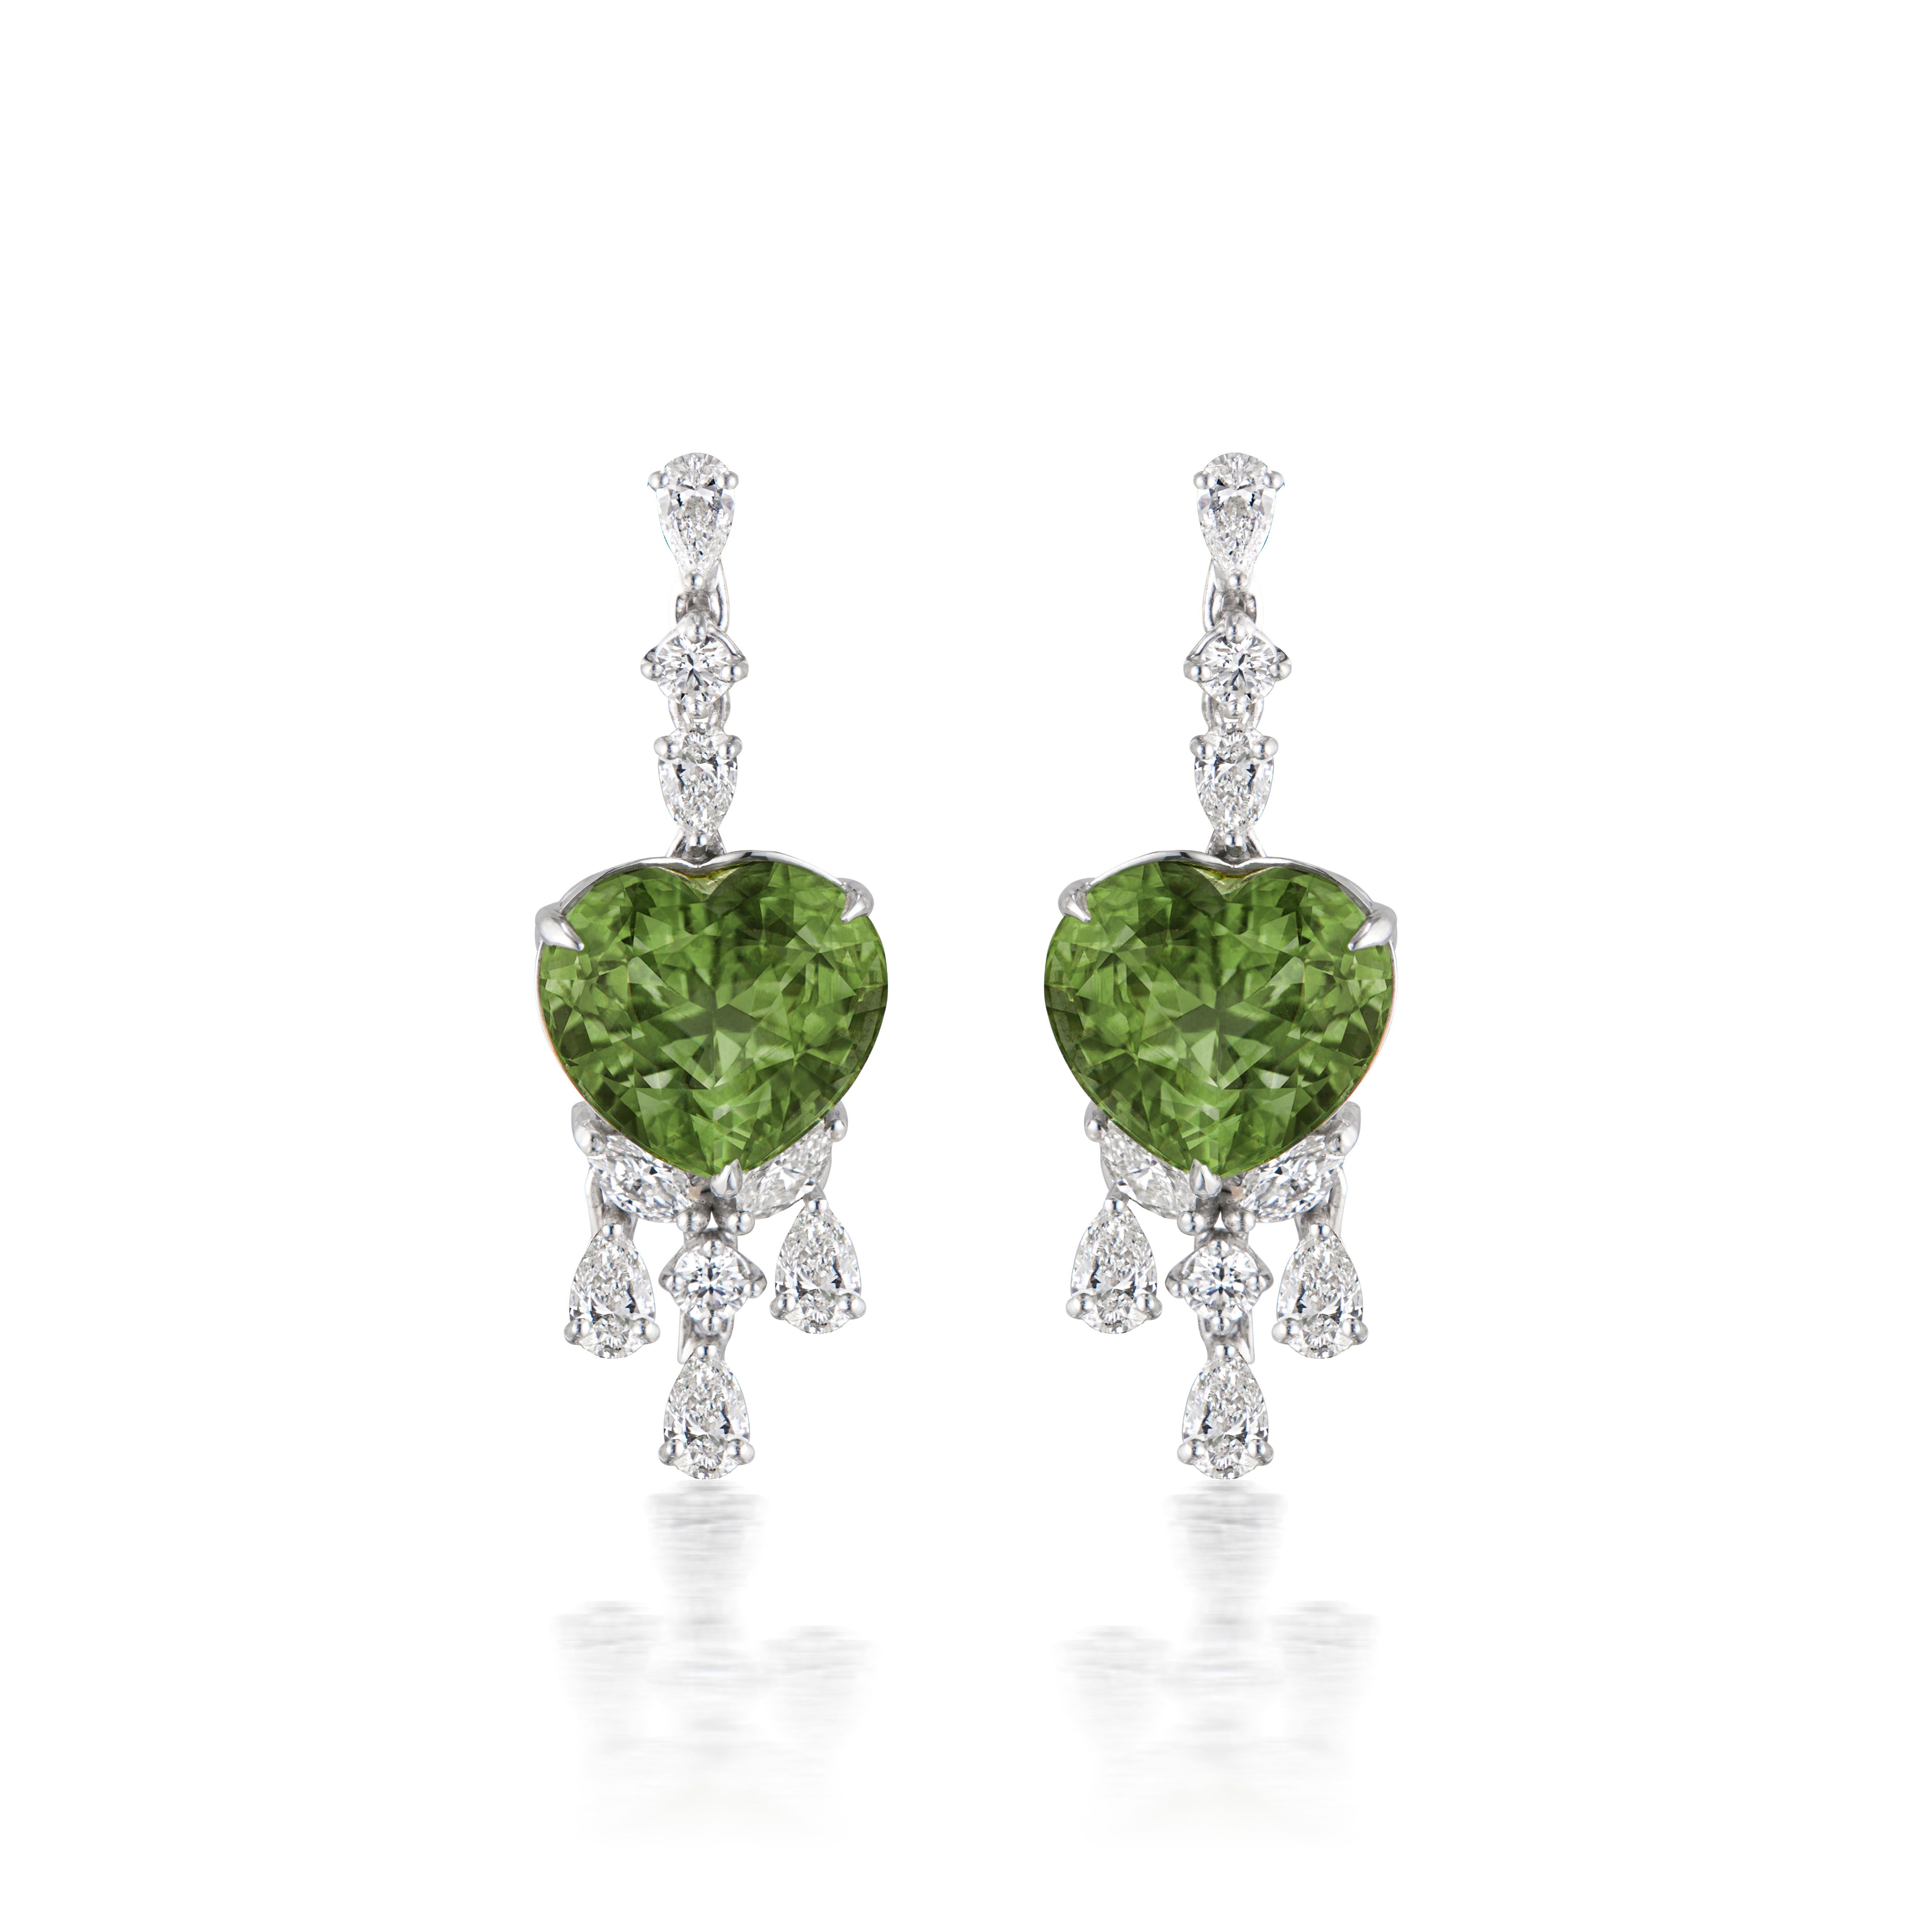 18K WHITE GOLD
4 ROUND DIAMONDS   0.22 CARATS
10 PEAR SHAPED DIAMONDS   0.81 CARATS
4 MARQUIS DIAMONDS   0.36 CARATS
2 BURMA PERIDOTS  11.43 CARATS (5.62, 5.80 cts)

Introducing our Enchanting Peridot Earrings, a mesmerizing blend of natural beauty